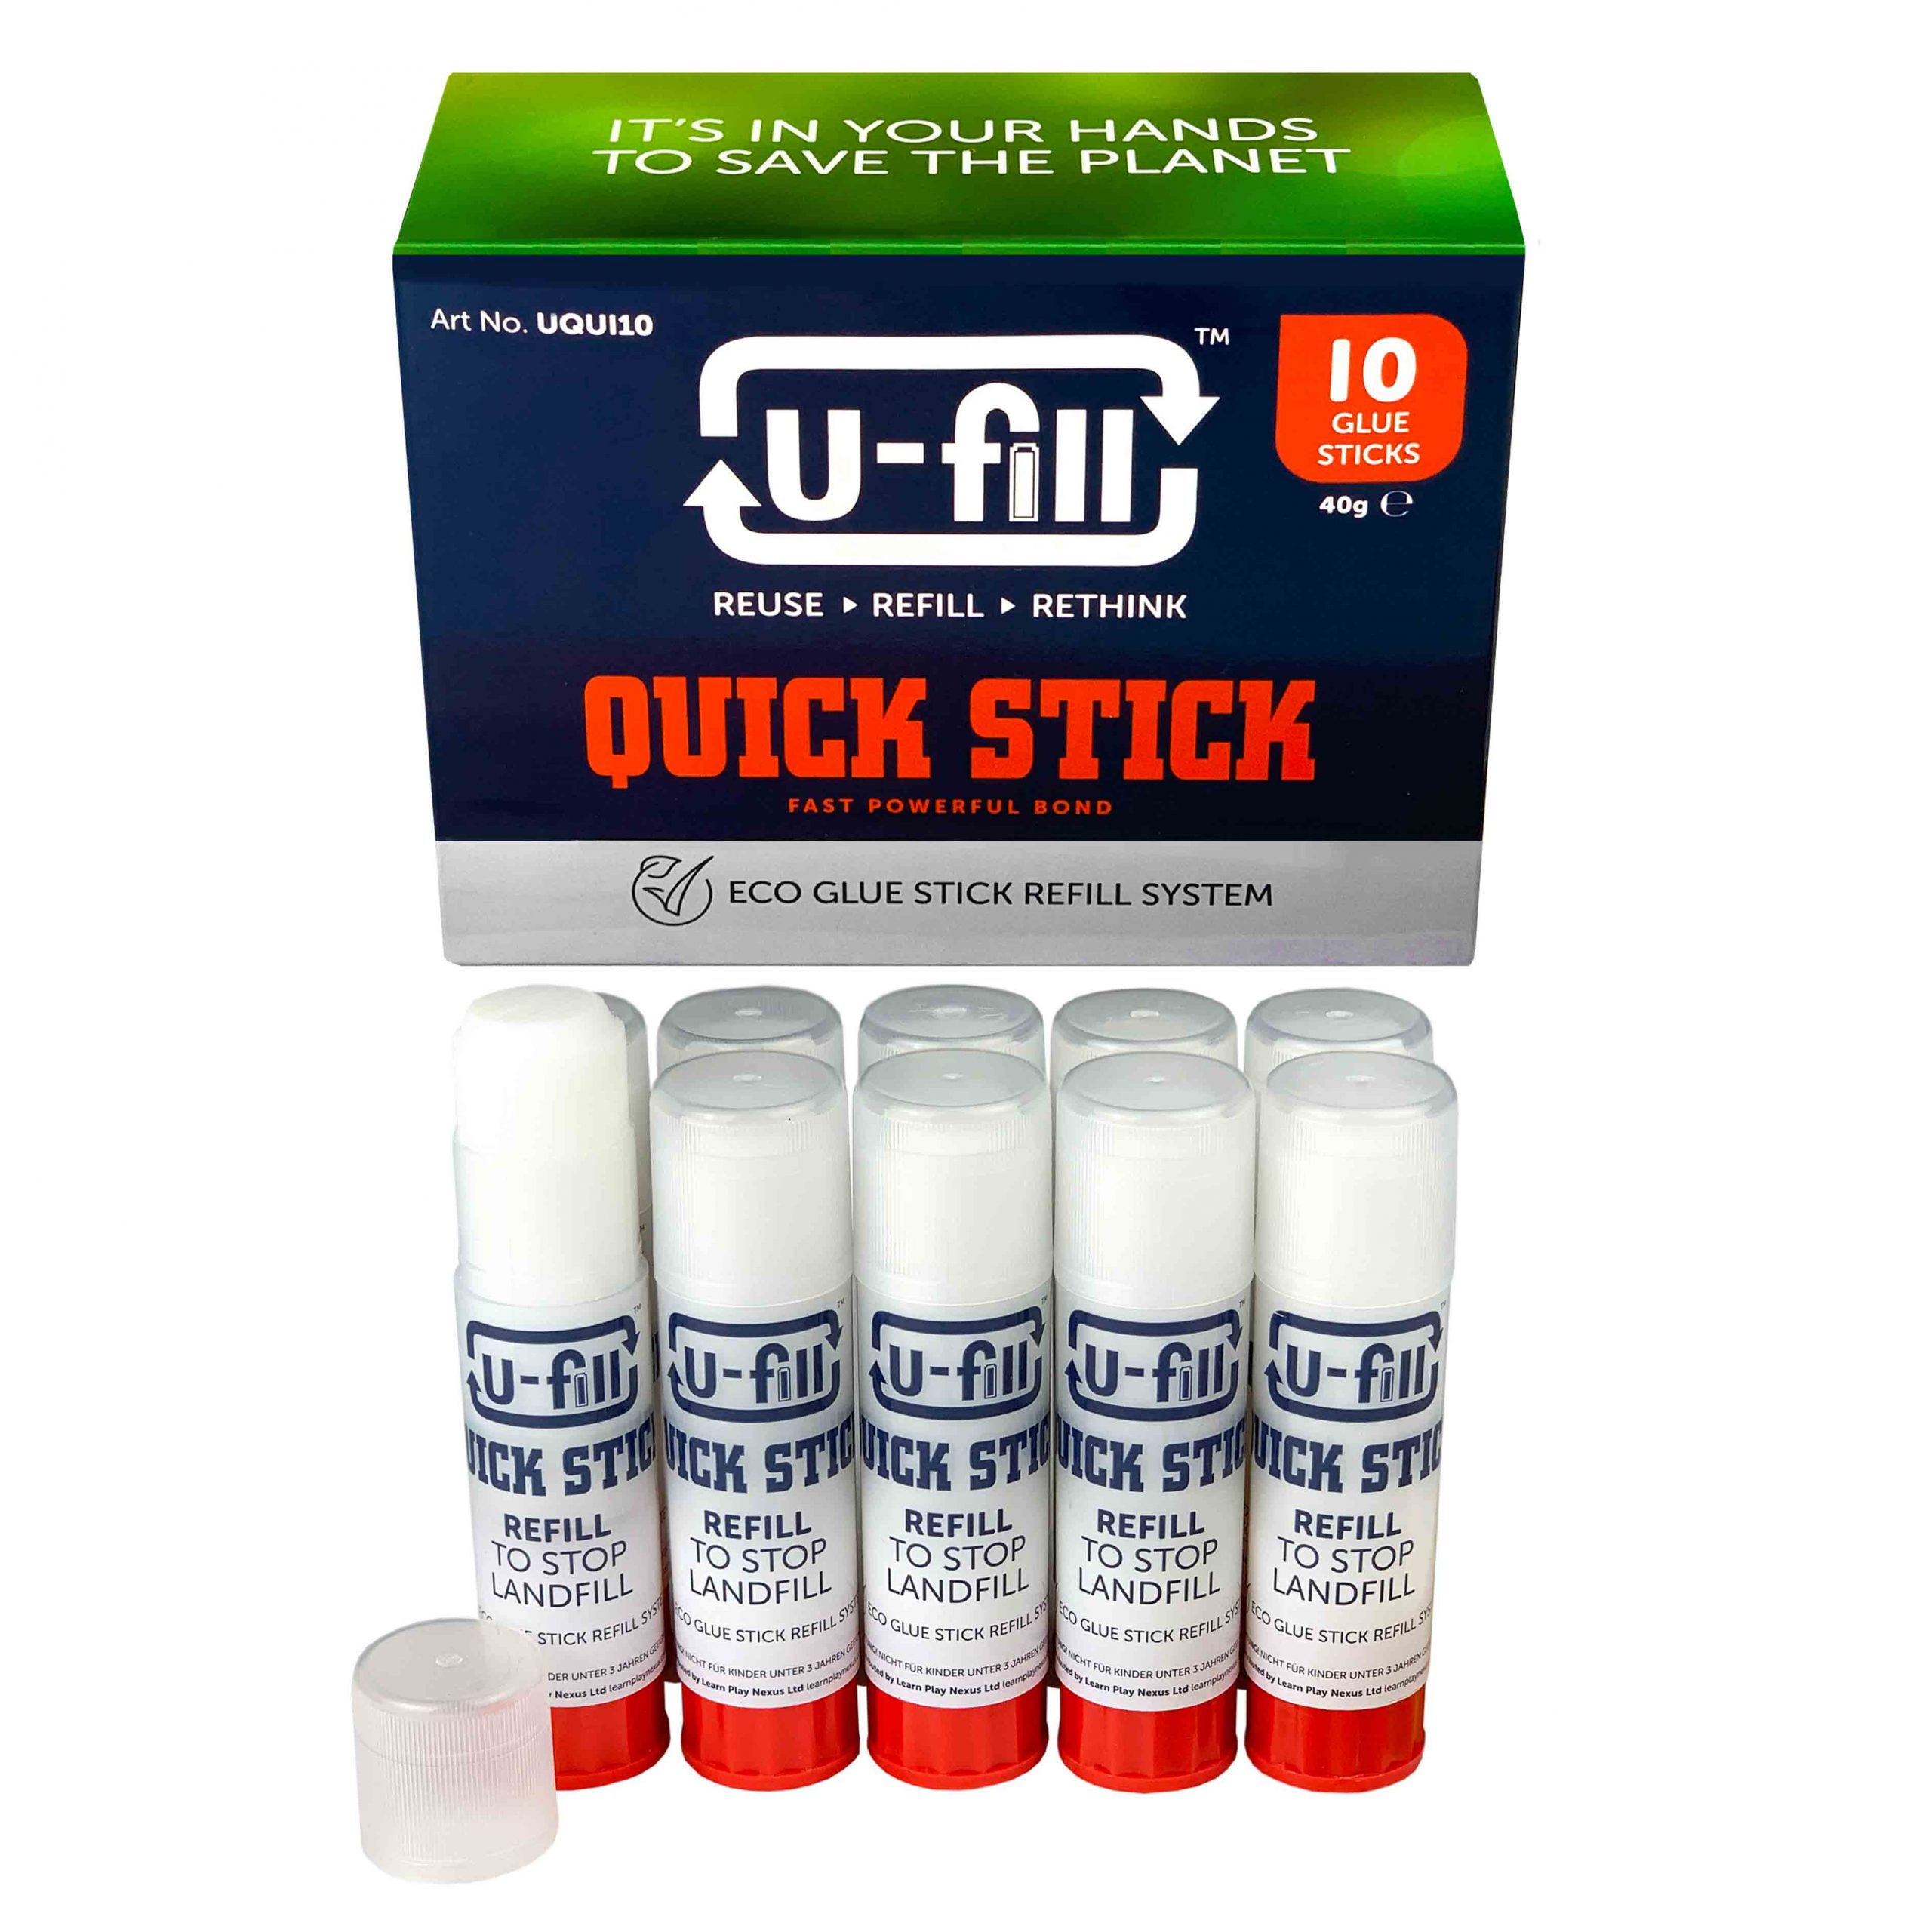 Learn Play Nexus - Introducing our new and unique reusable glue stick  system 'U-fill'. In our new deal, enjoy 24 FREE Gel Sticks with every  purchase of 100 refills! U-fill. Reuse. Refill.